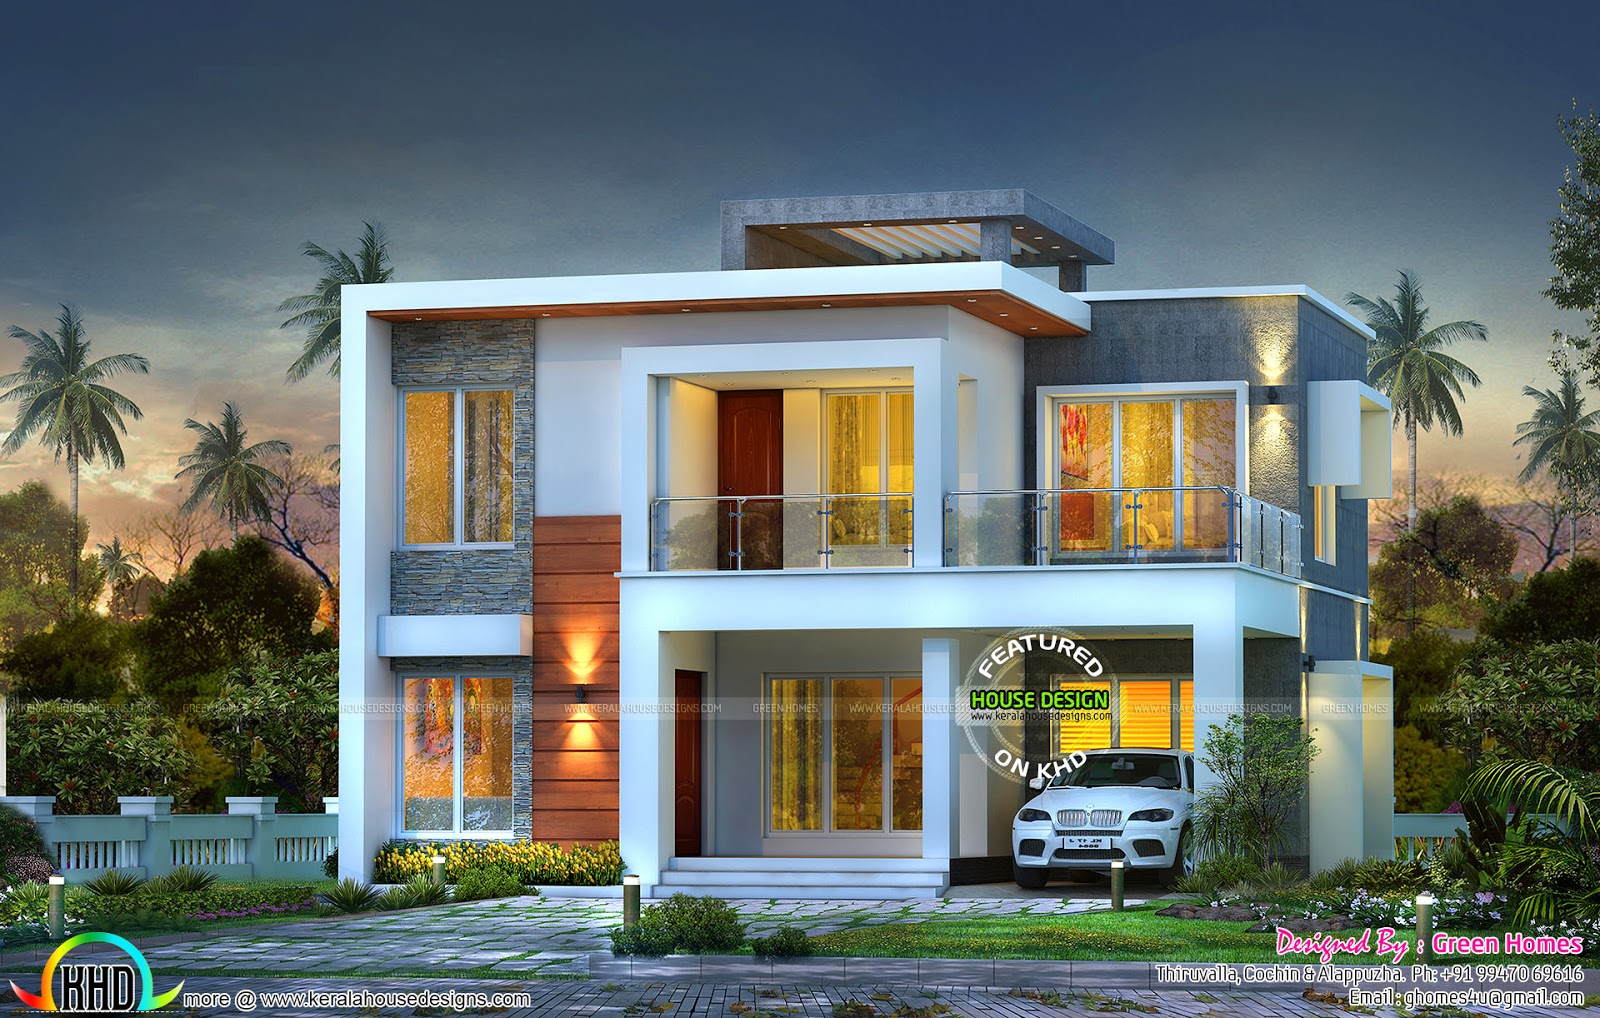  Contemporary  3 bedroom home  1800  sq  ft  Kerala home  